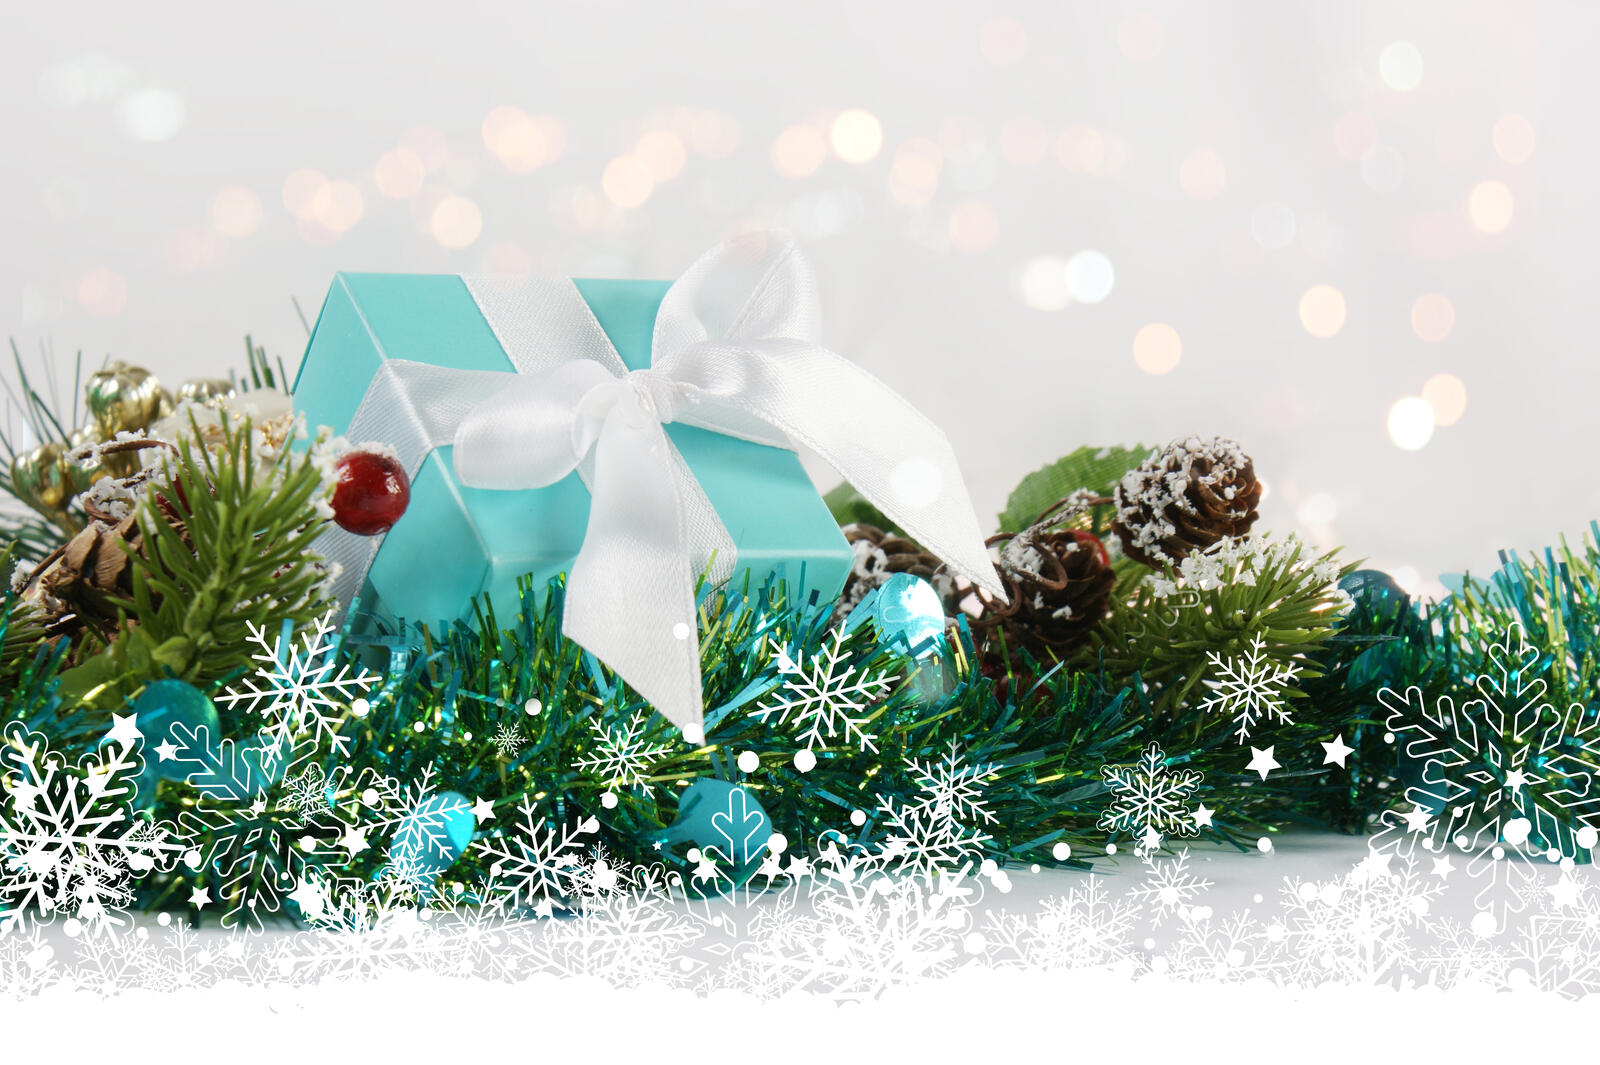 Wallpapers holiday decor gifts on the desktop